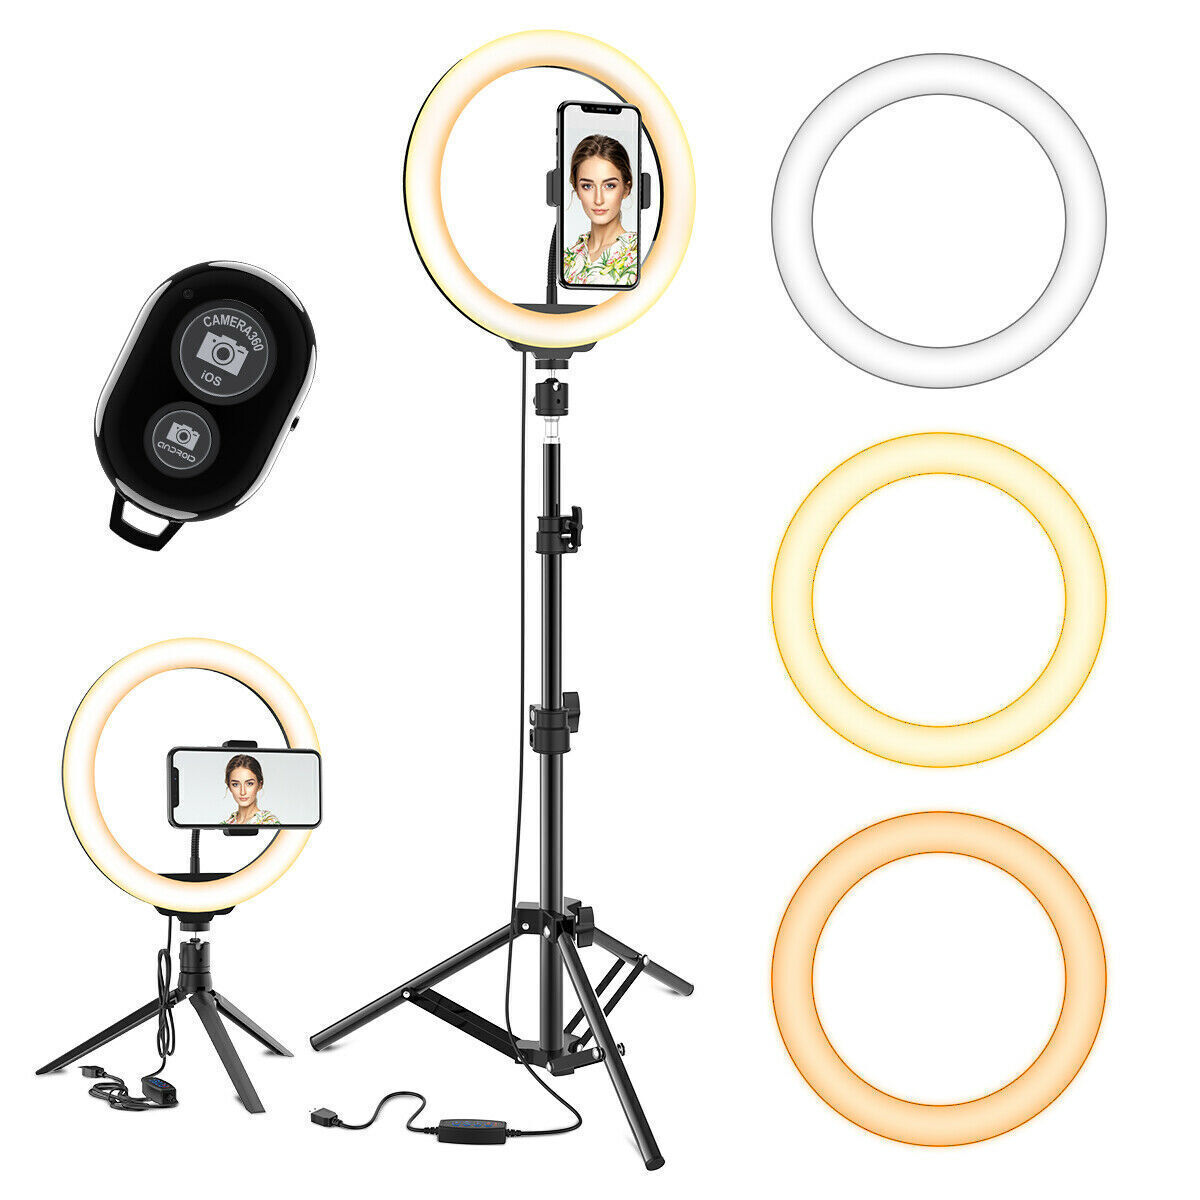 Selfie LED Ring Light 12" with Tripod Stand for YouTube/ Tiktok Video Recording Light Color: RGB, Blue, Gree